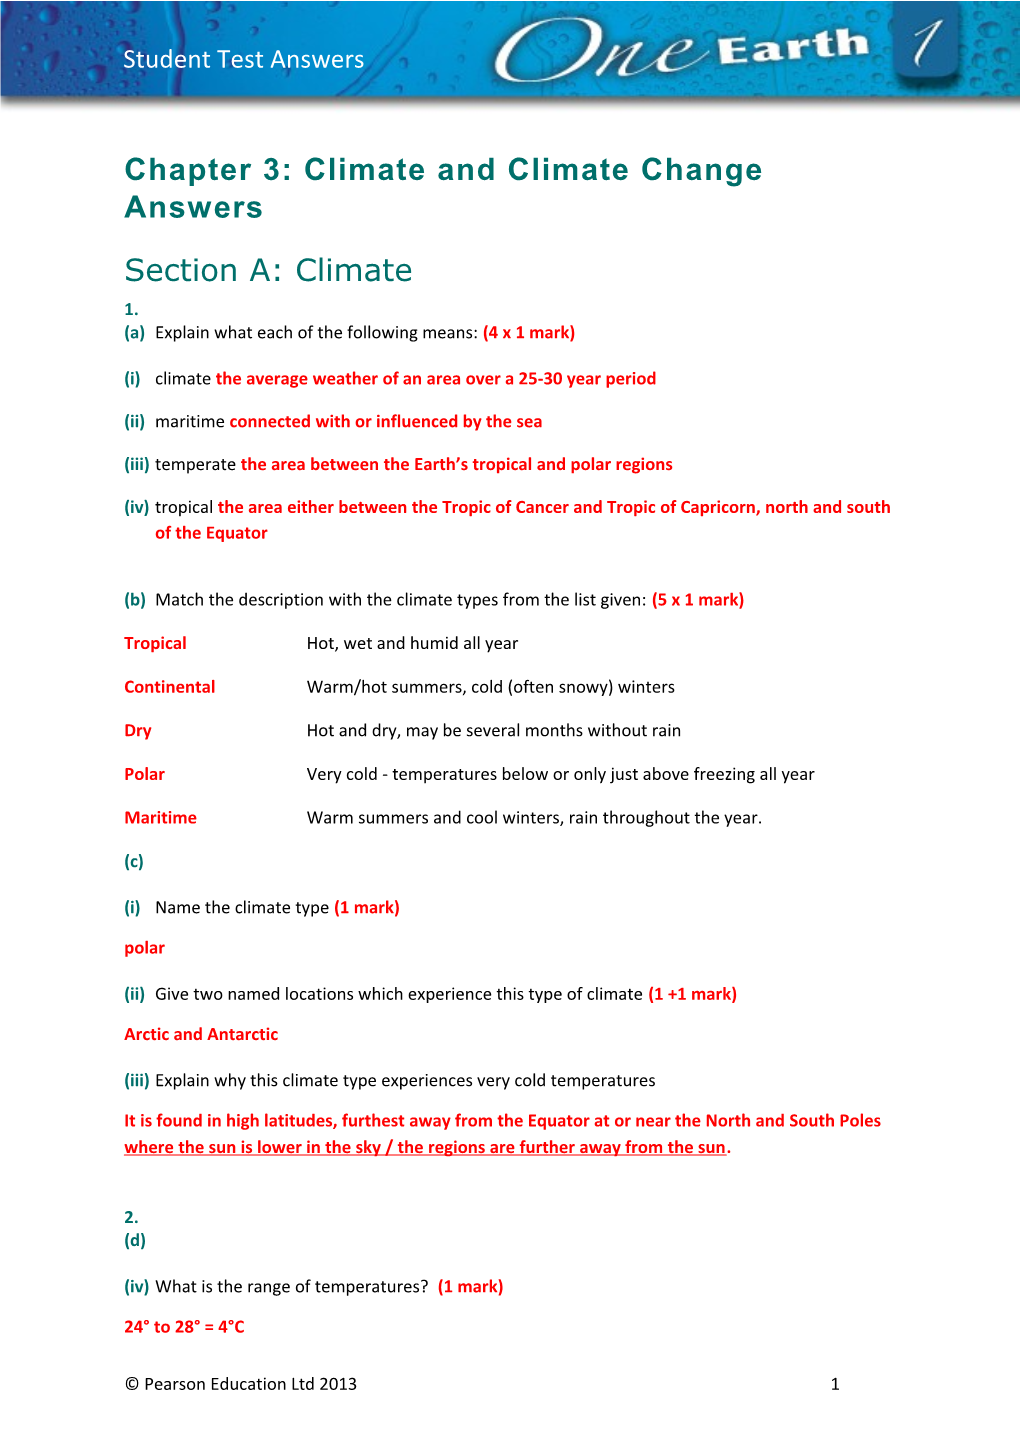 Chapter 3: Climate and Climate Change Answers